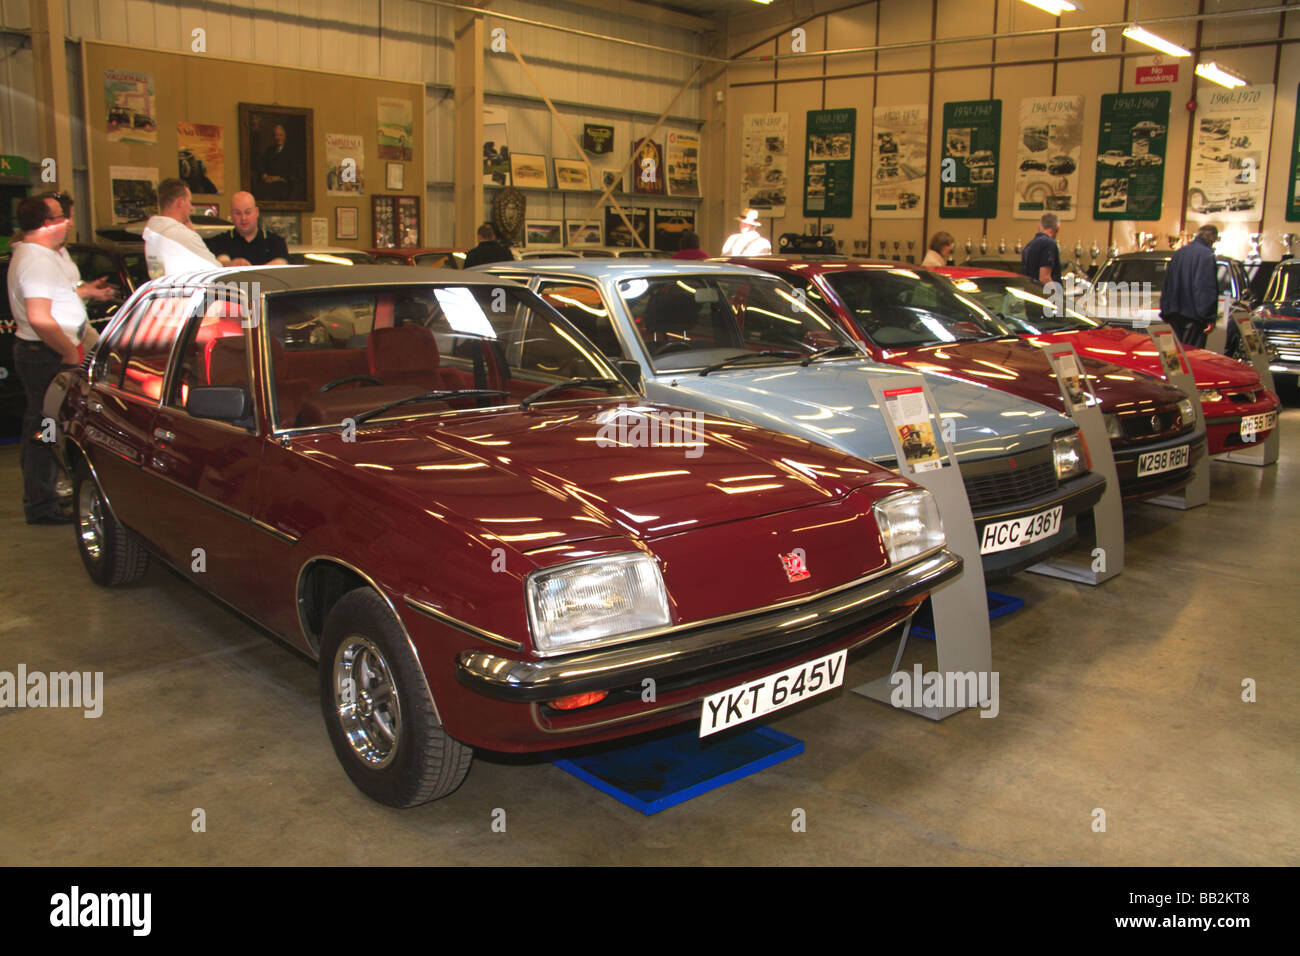 Vauxhall Motors Heritage Luton Cavalier museum collection cars classic England Britain British industry Stock Photo